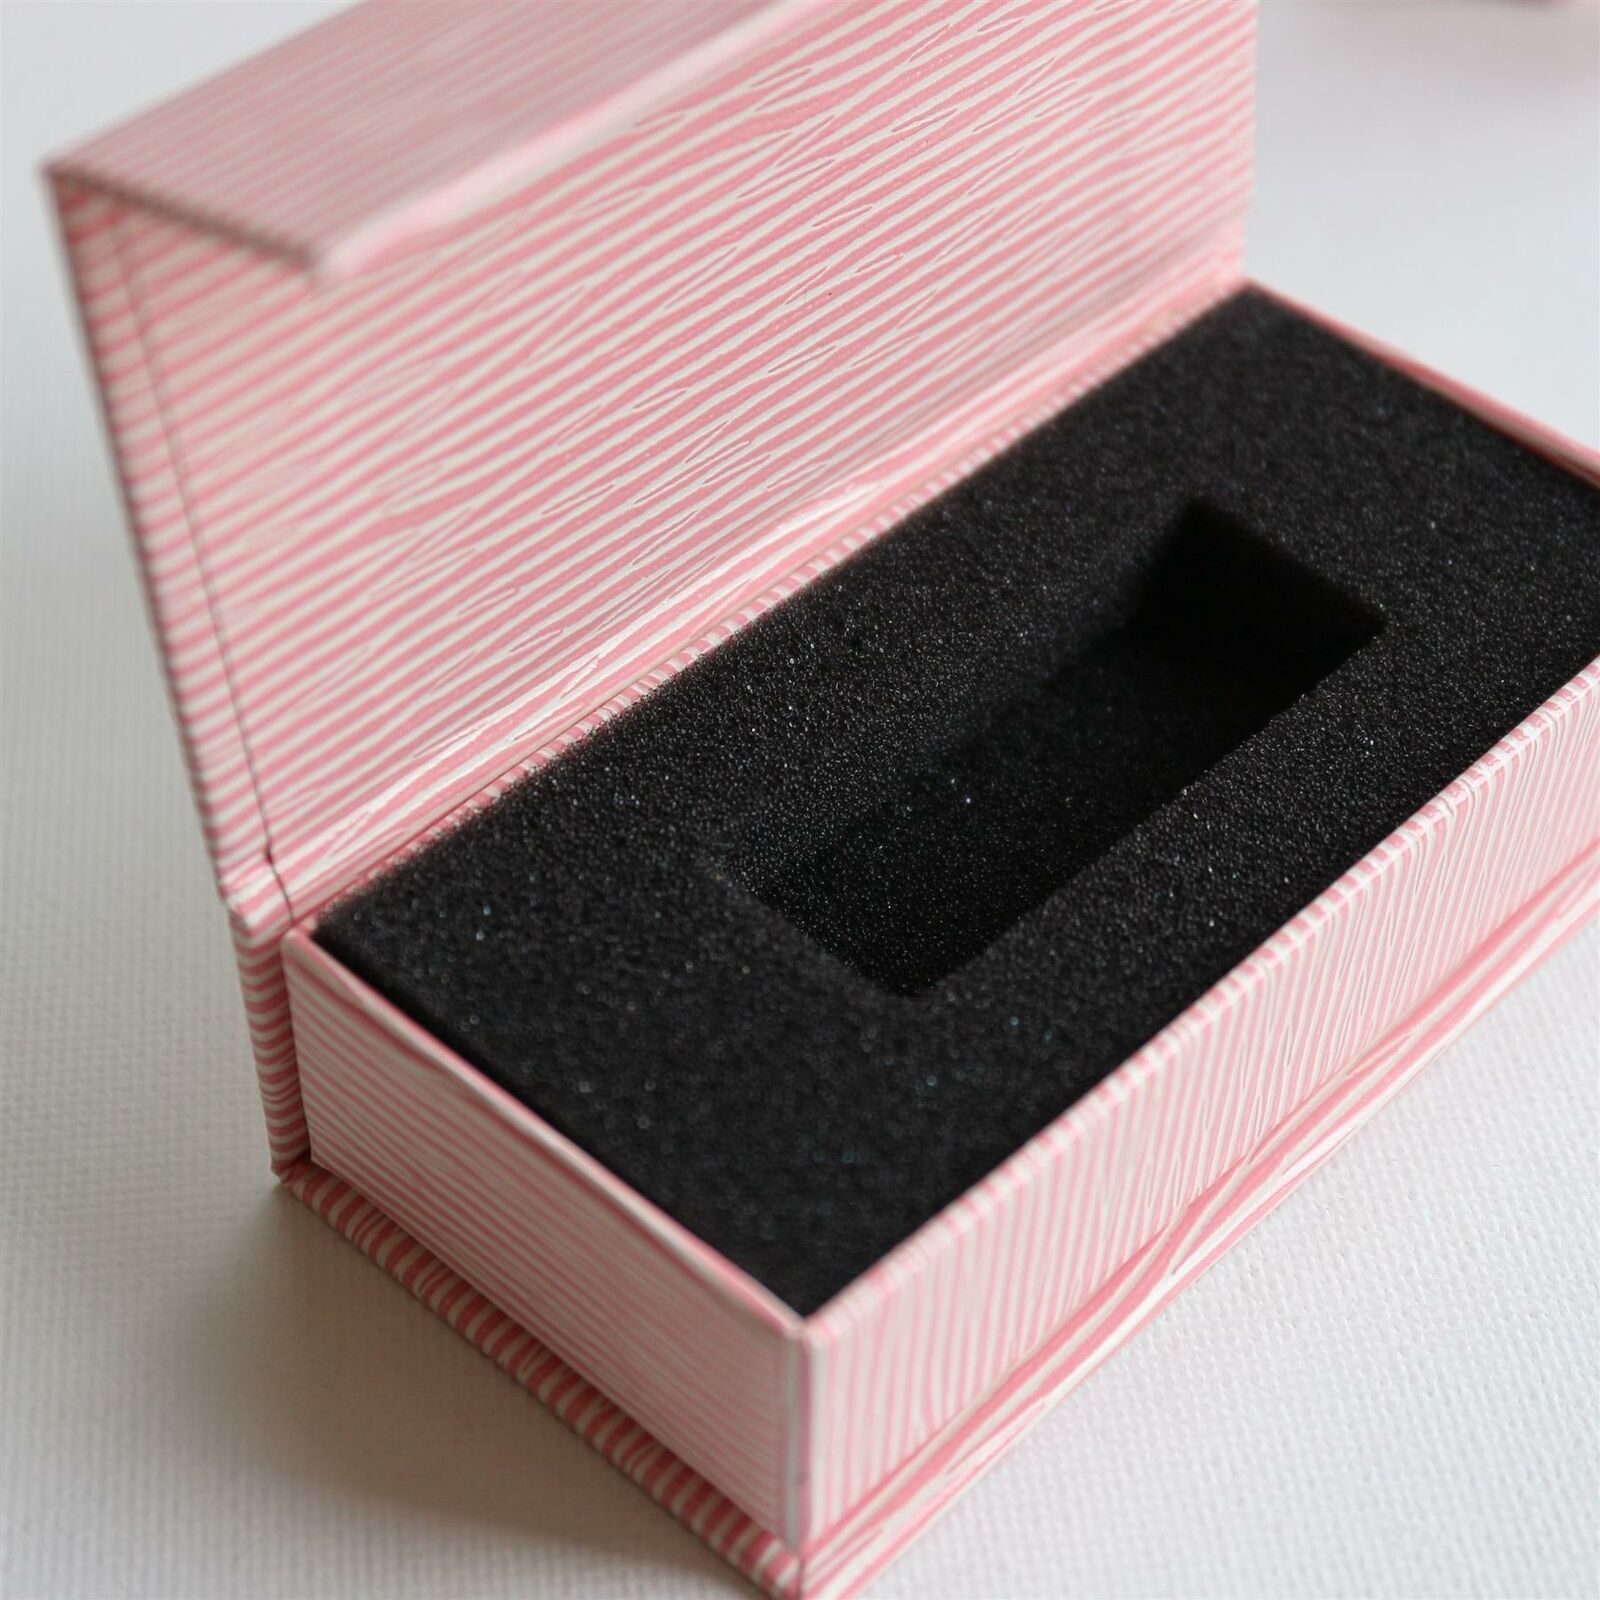 Primary image for 4x pink magnetic boxes for usb flash memories and removable drives